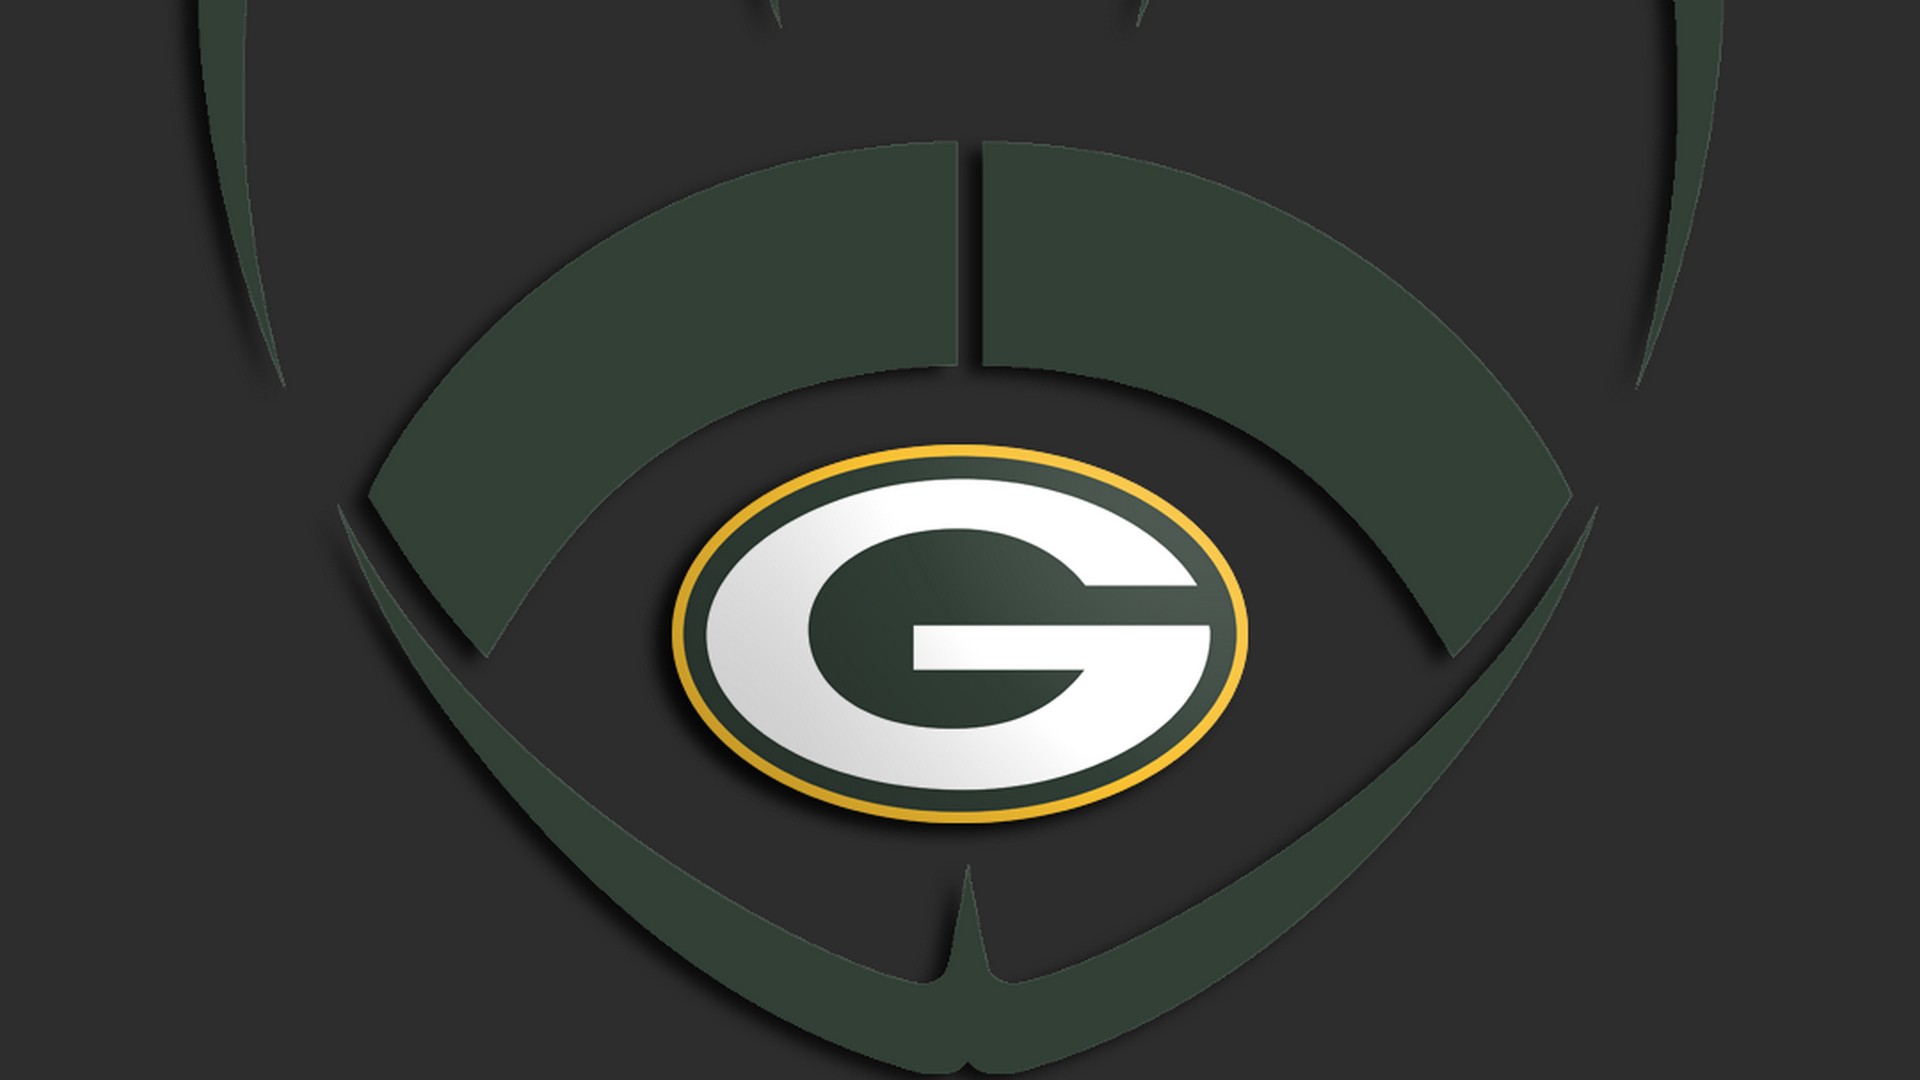 HD Green Bay Packers NFL Wallpapers with resolution 1920x1080 pixel. You can make this wallpaper for your Mac or Windows Desktop Background, iPhone, Android or Tablet and another Smartphone device